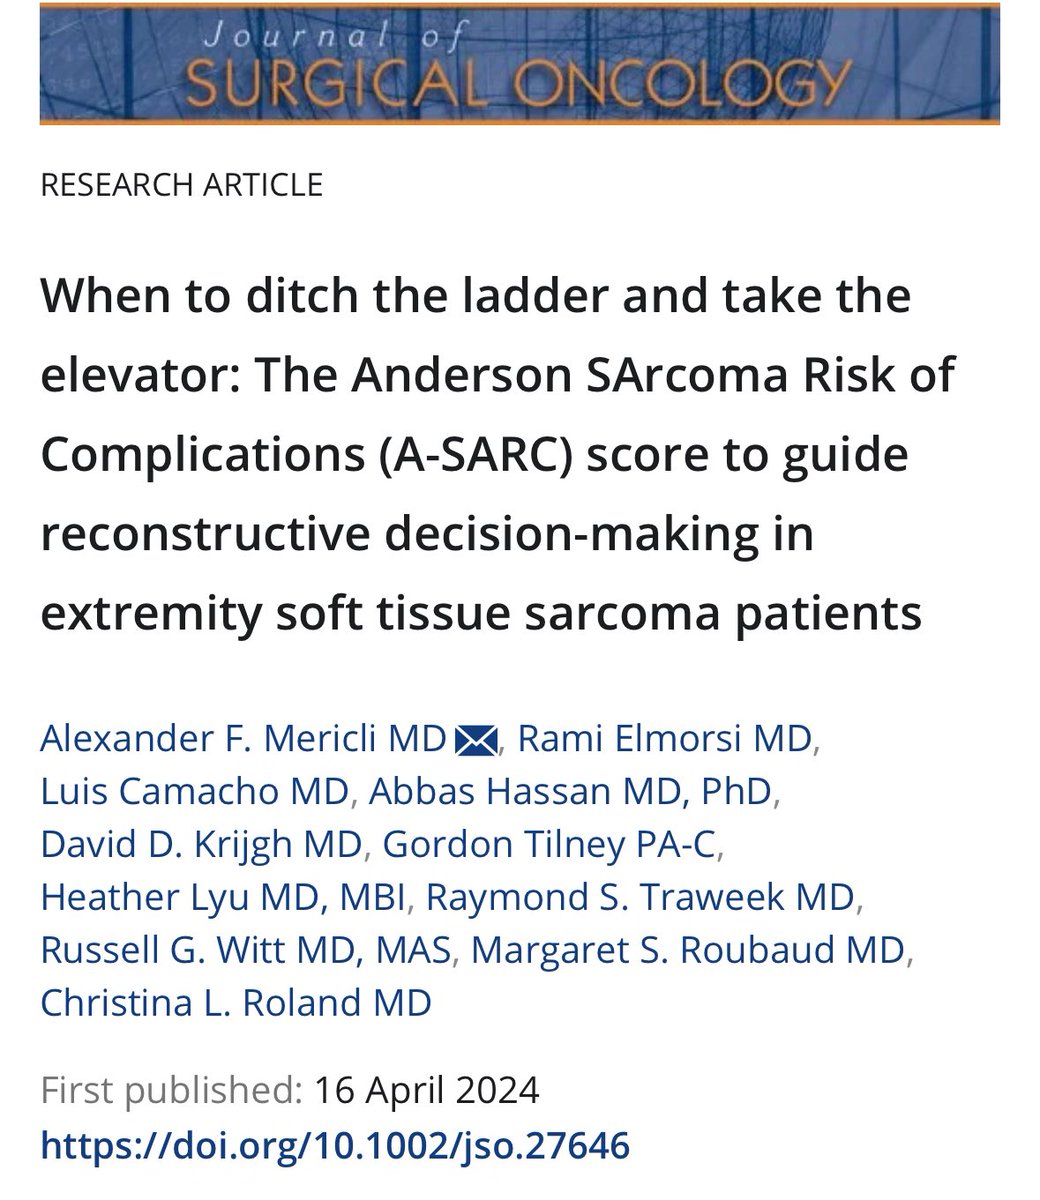 Our latest study @JofSurgOnc provides a novel risk assessment tool the “Anderson Sarcoma Risk of Complications (A-SARC) score” to optimize reconstructive strategies in extremity soft tissue sarcoma. Read the full text: doi.org/10.1002/jso.27… @SocSurgOnc @MDAndersonNews